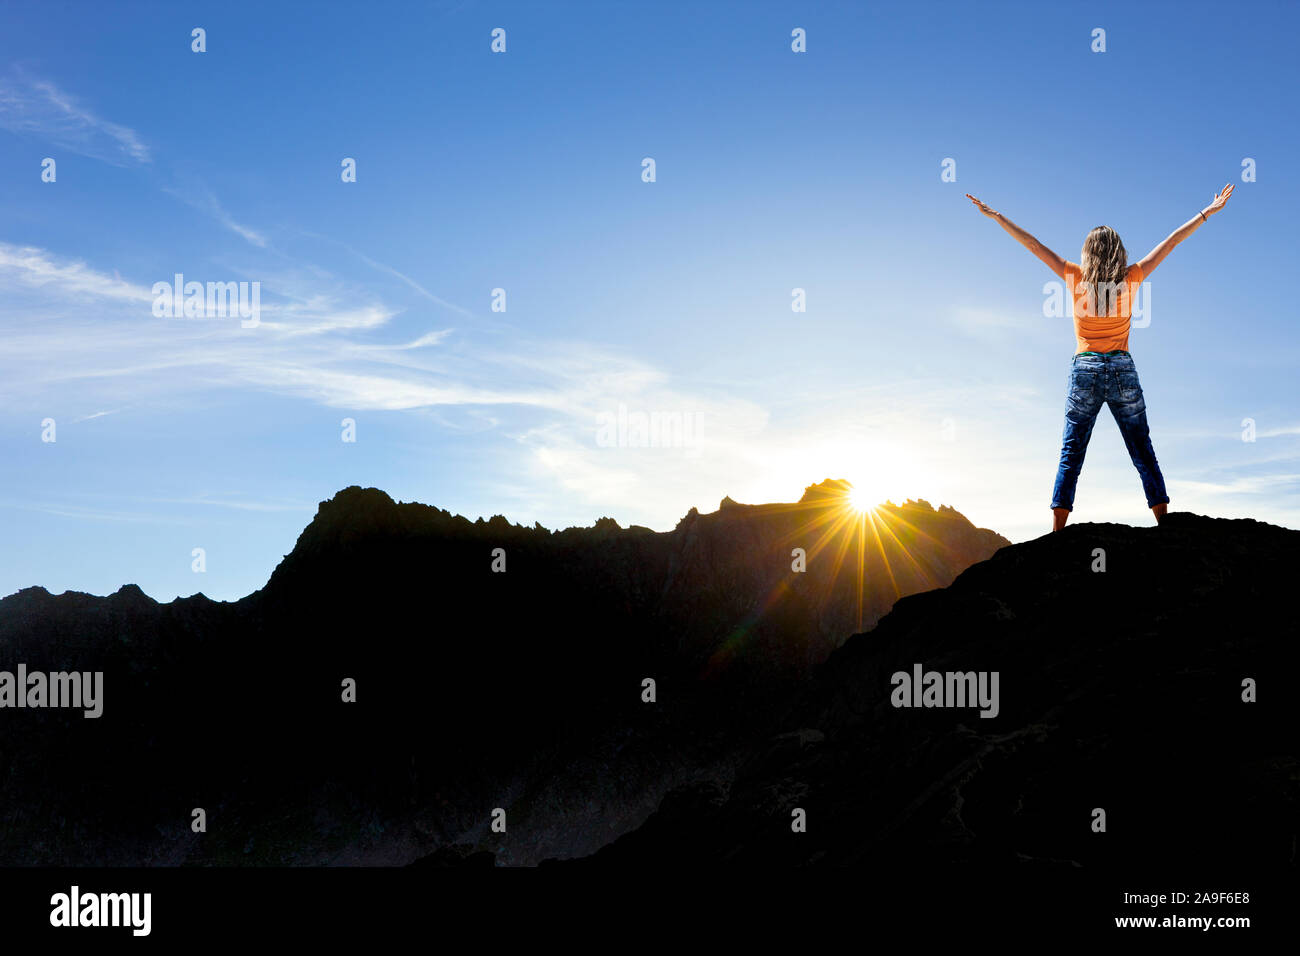 Woman on a hilltop Stock Photo